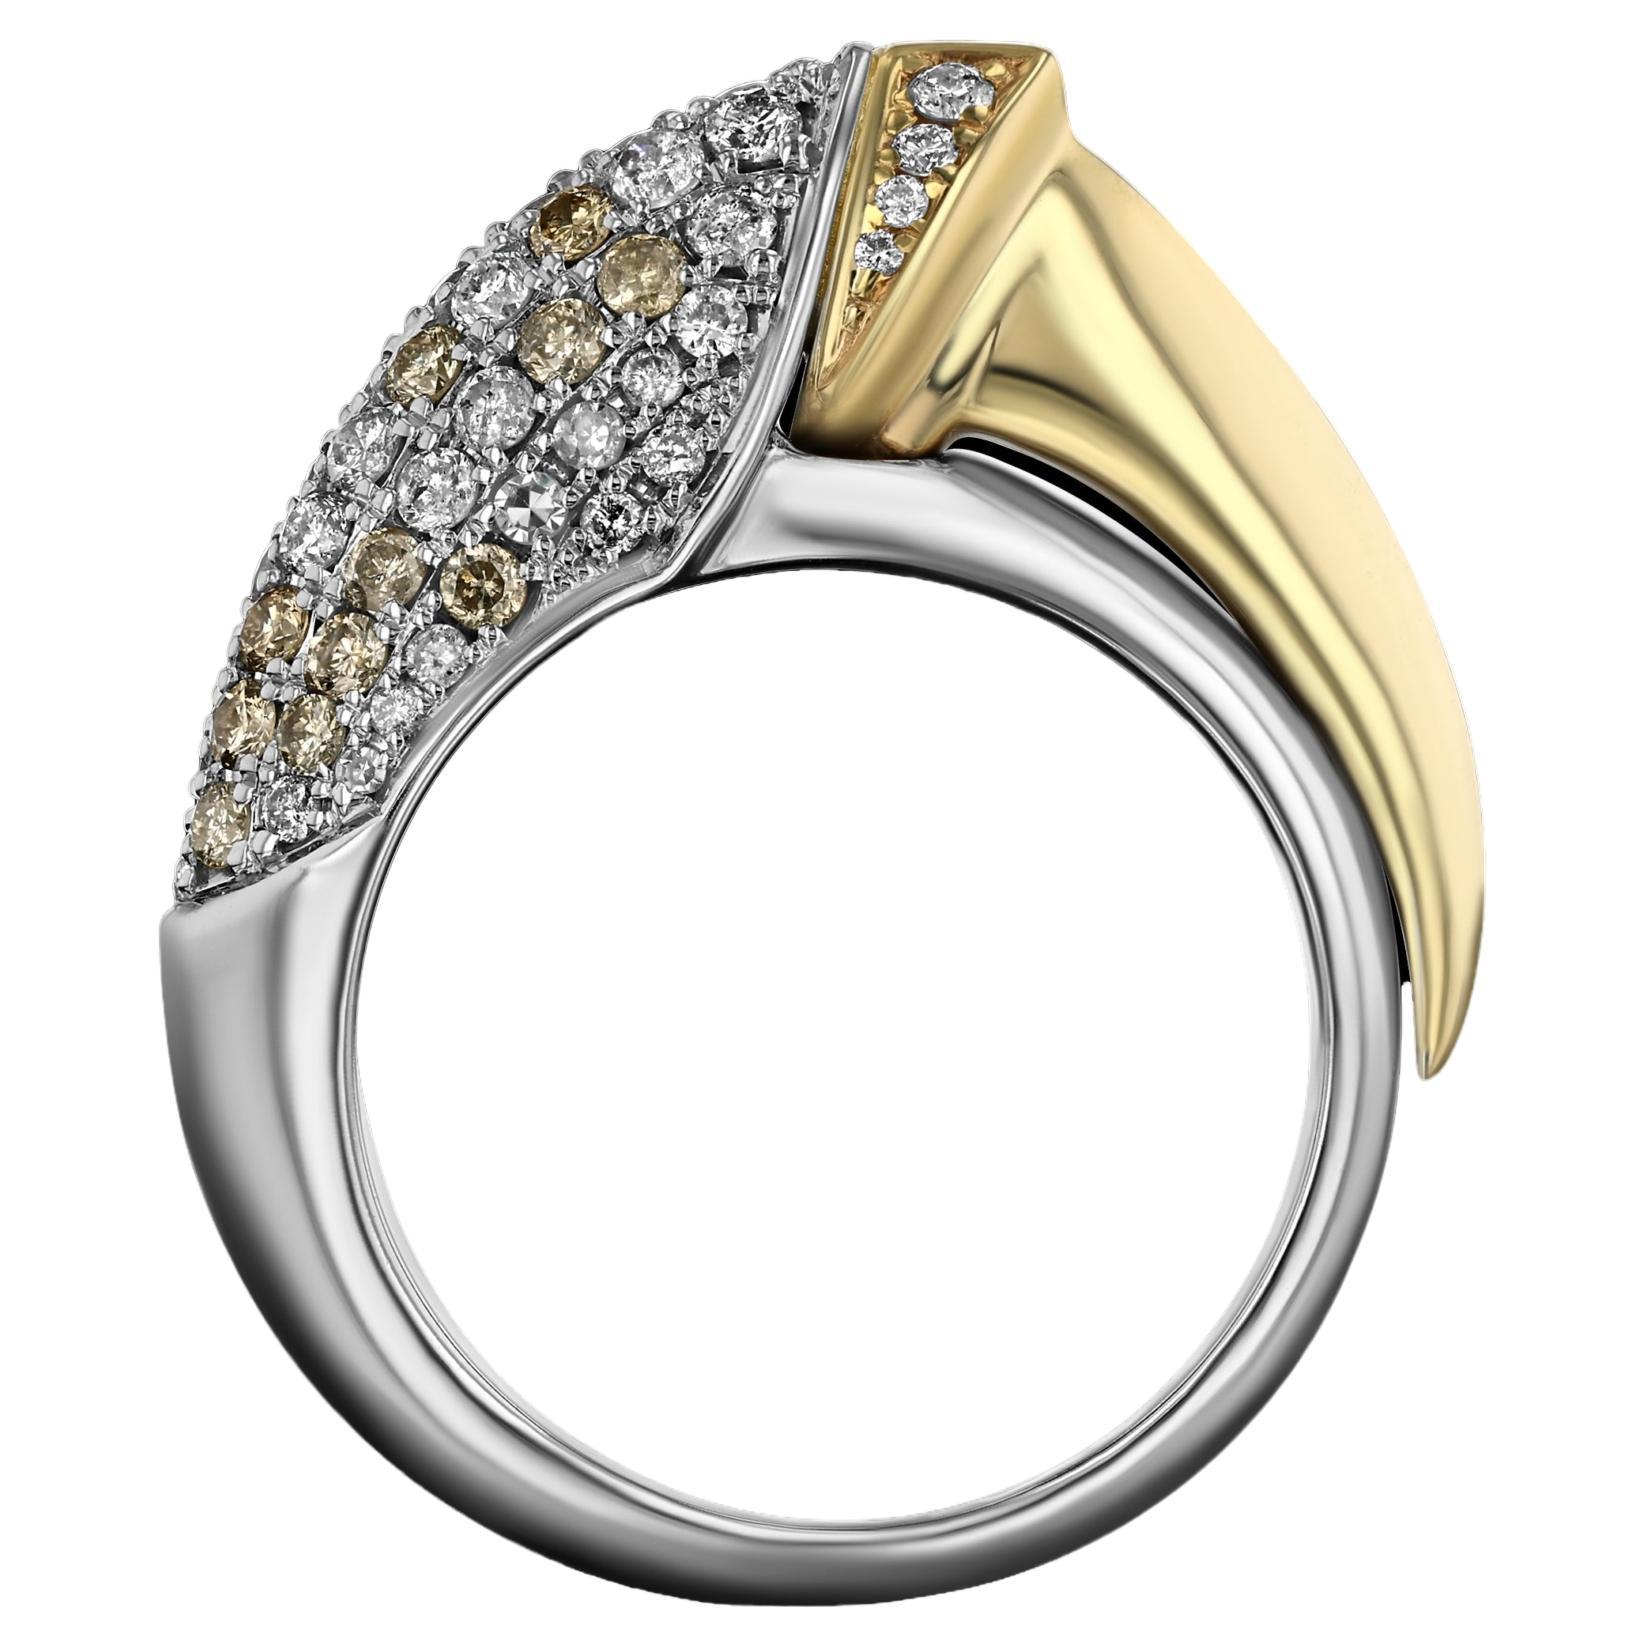 House of RAVN, 14k White & Yellow Gold RAVN'S Claw Ring with 1.1ct Diamonds